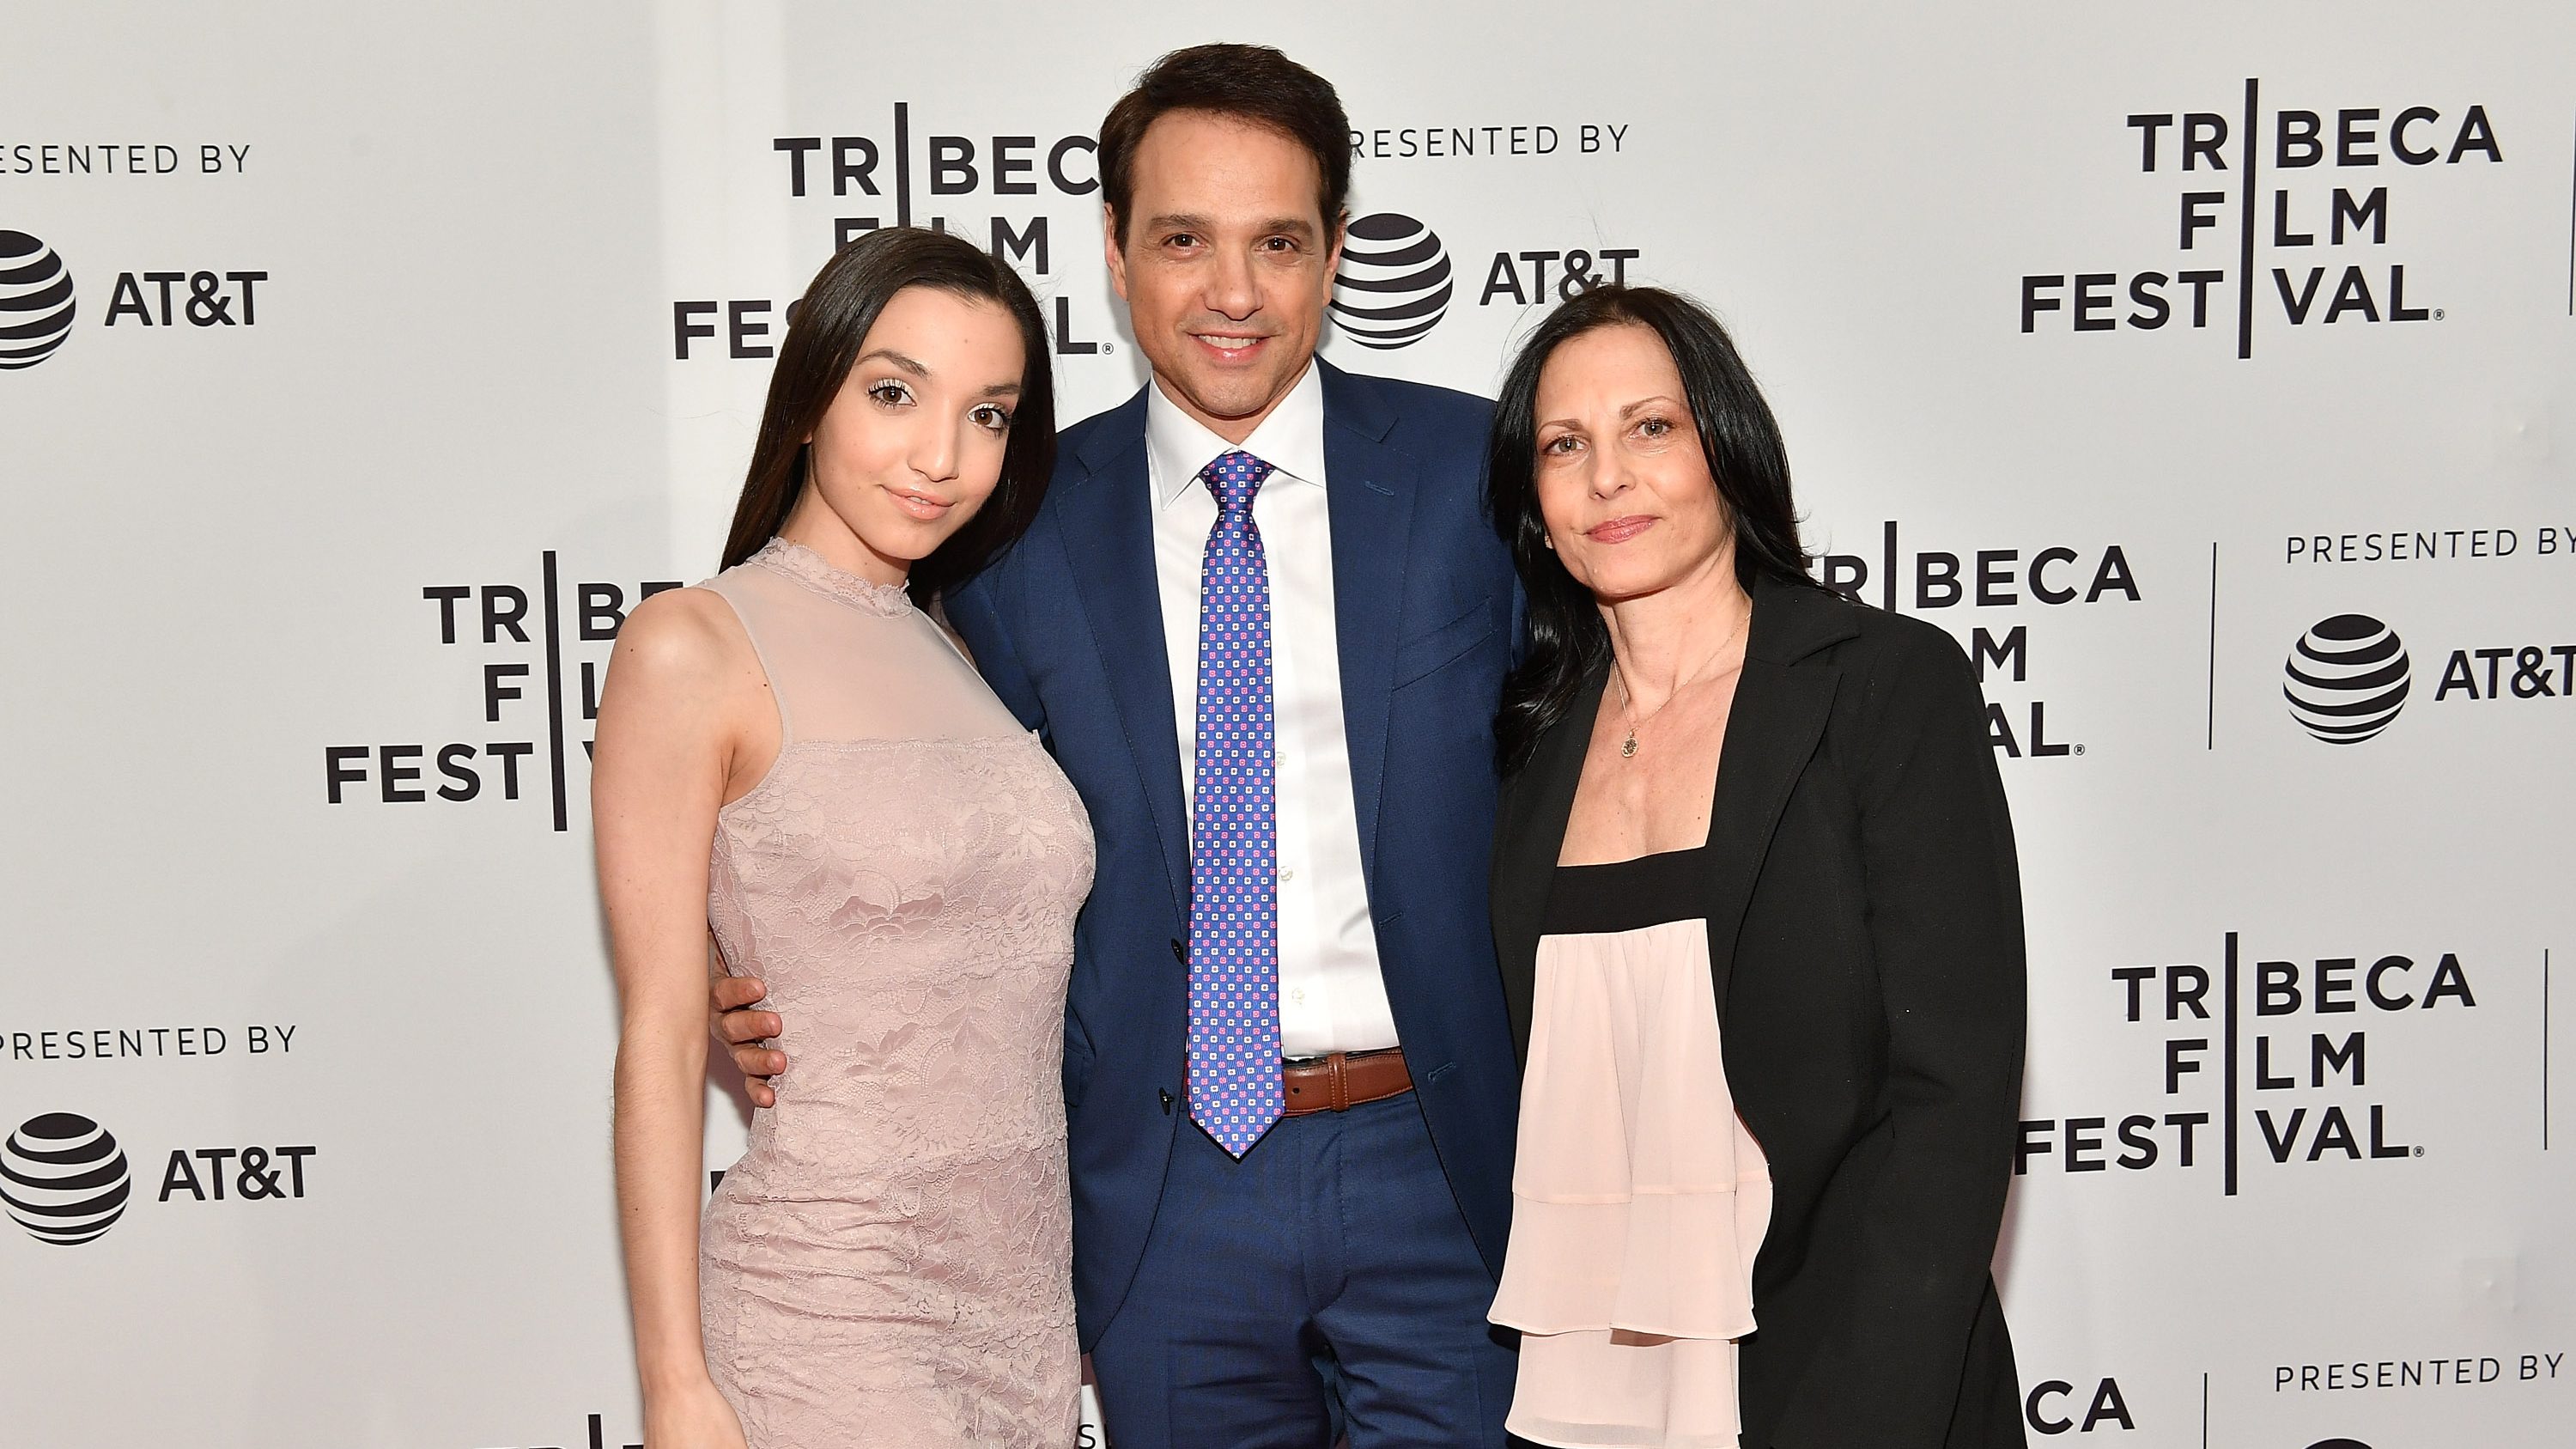 Ralph Macchio's Family 5 Fast Facts You Need to Know